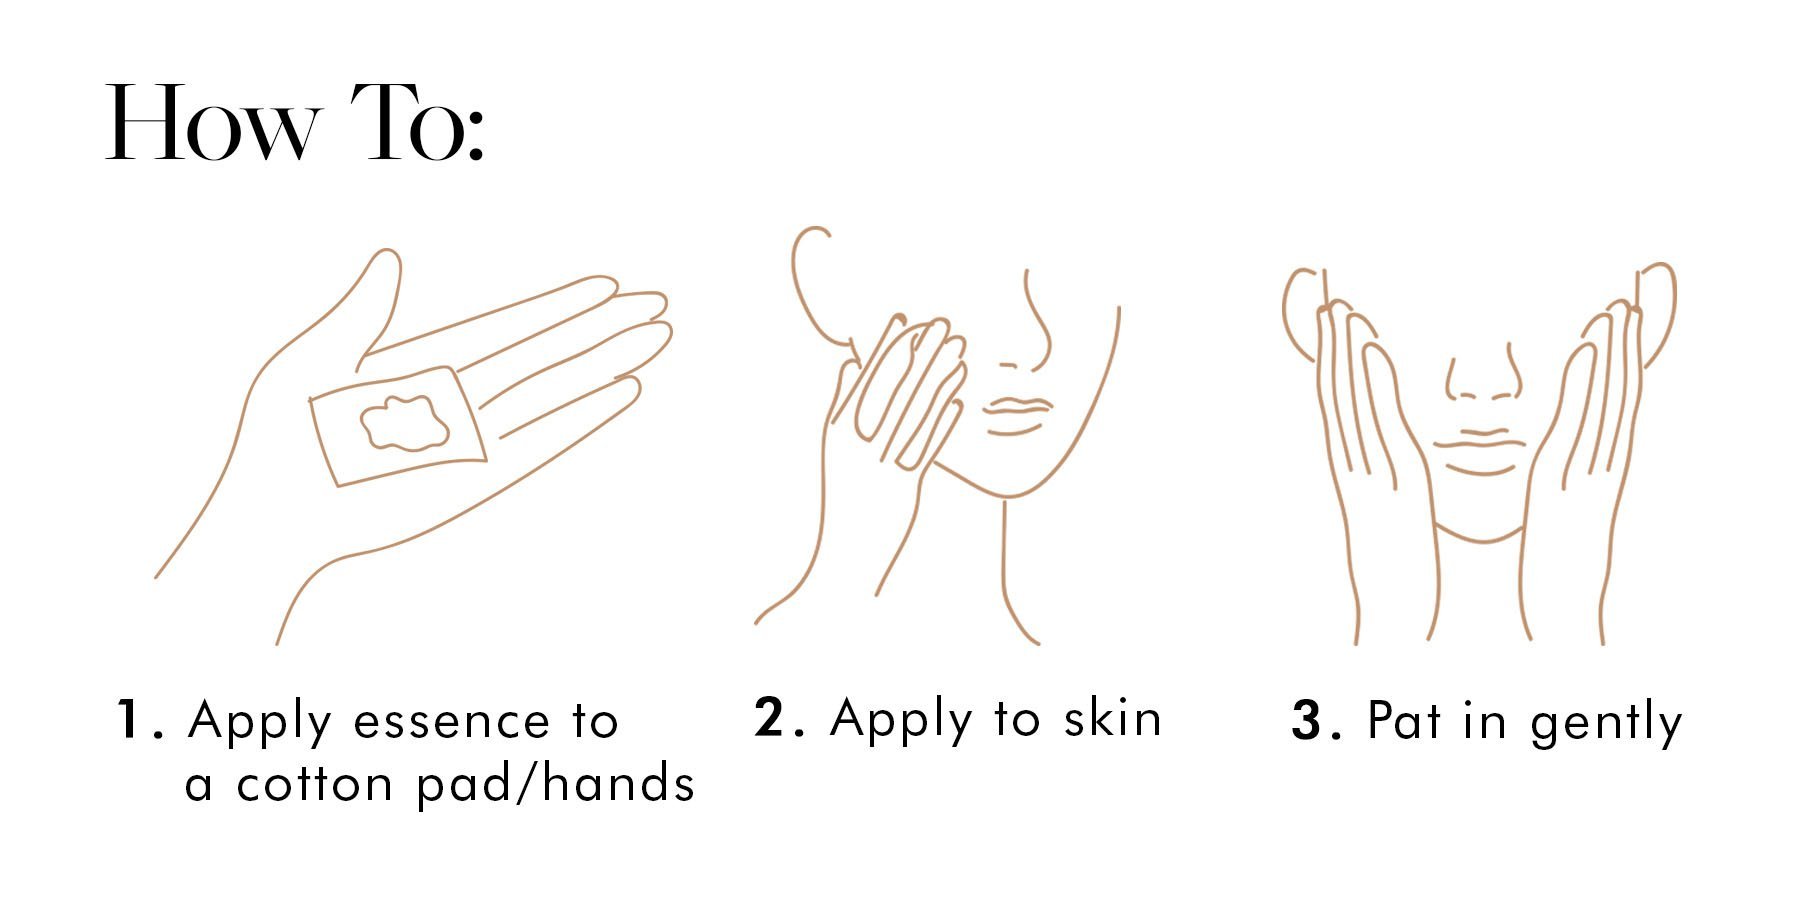 Apply essence to a cotton pad/hands, apply to skin and pat in gently